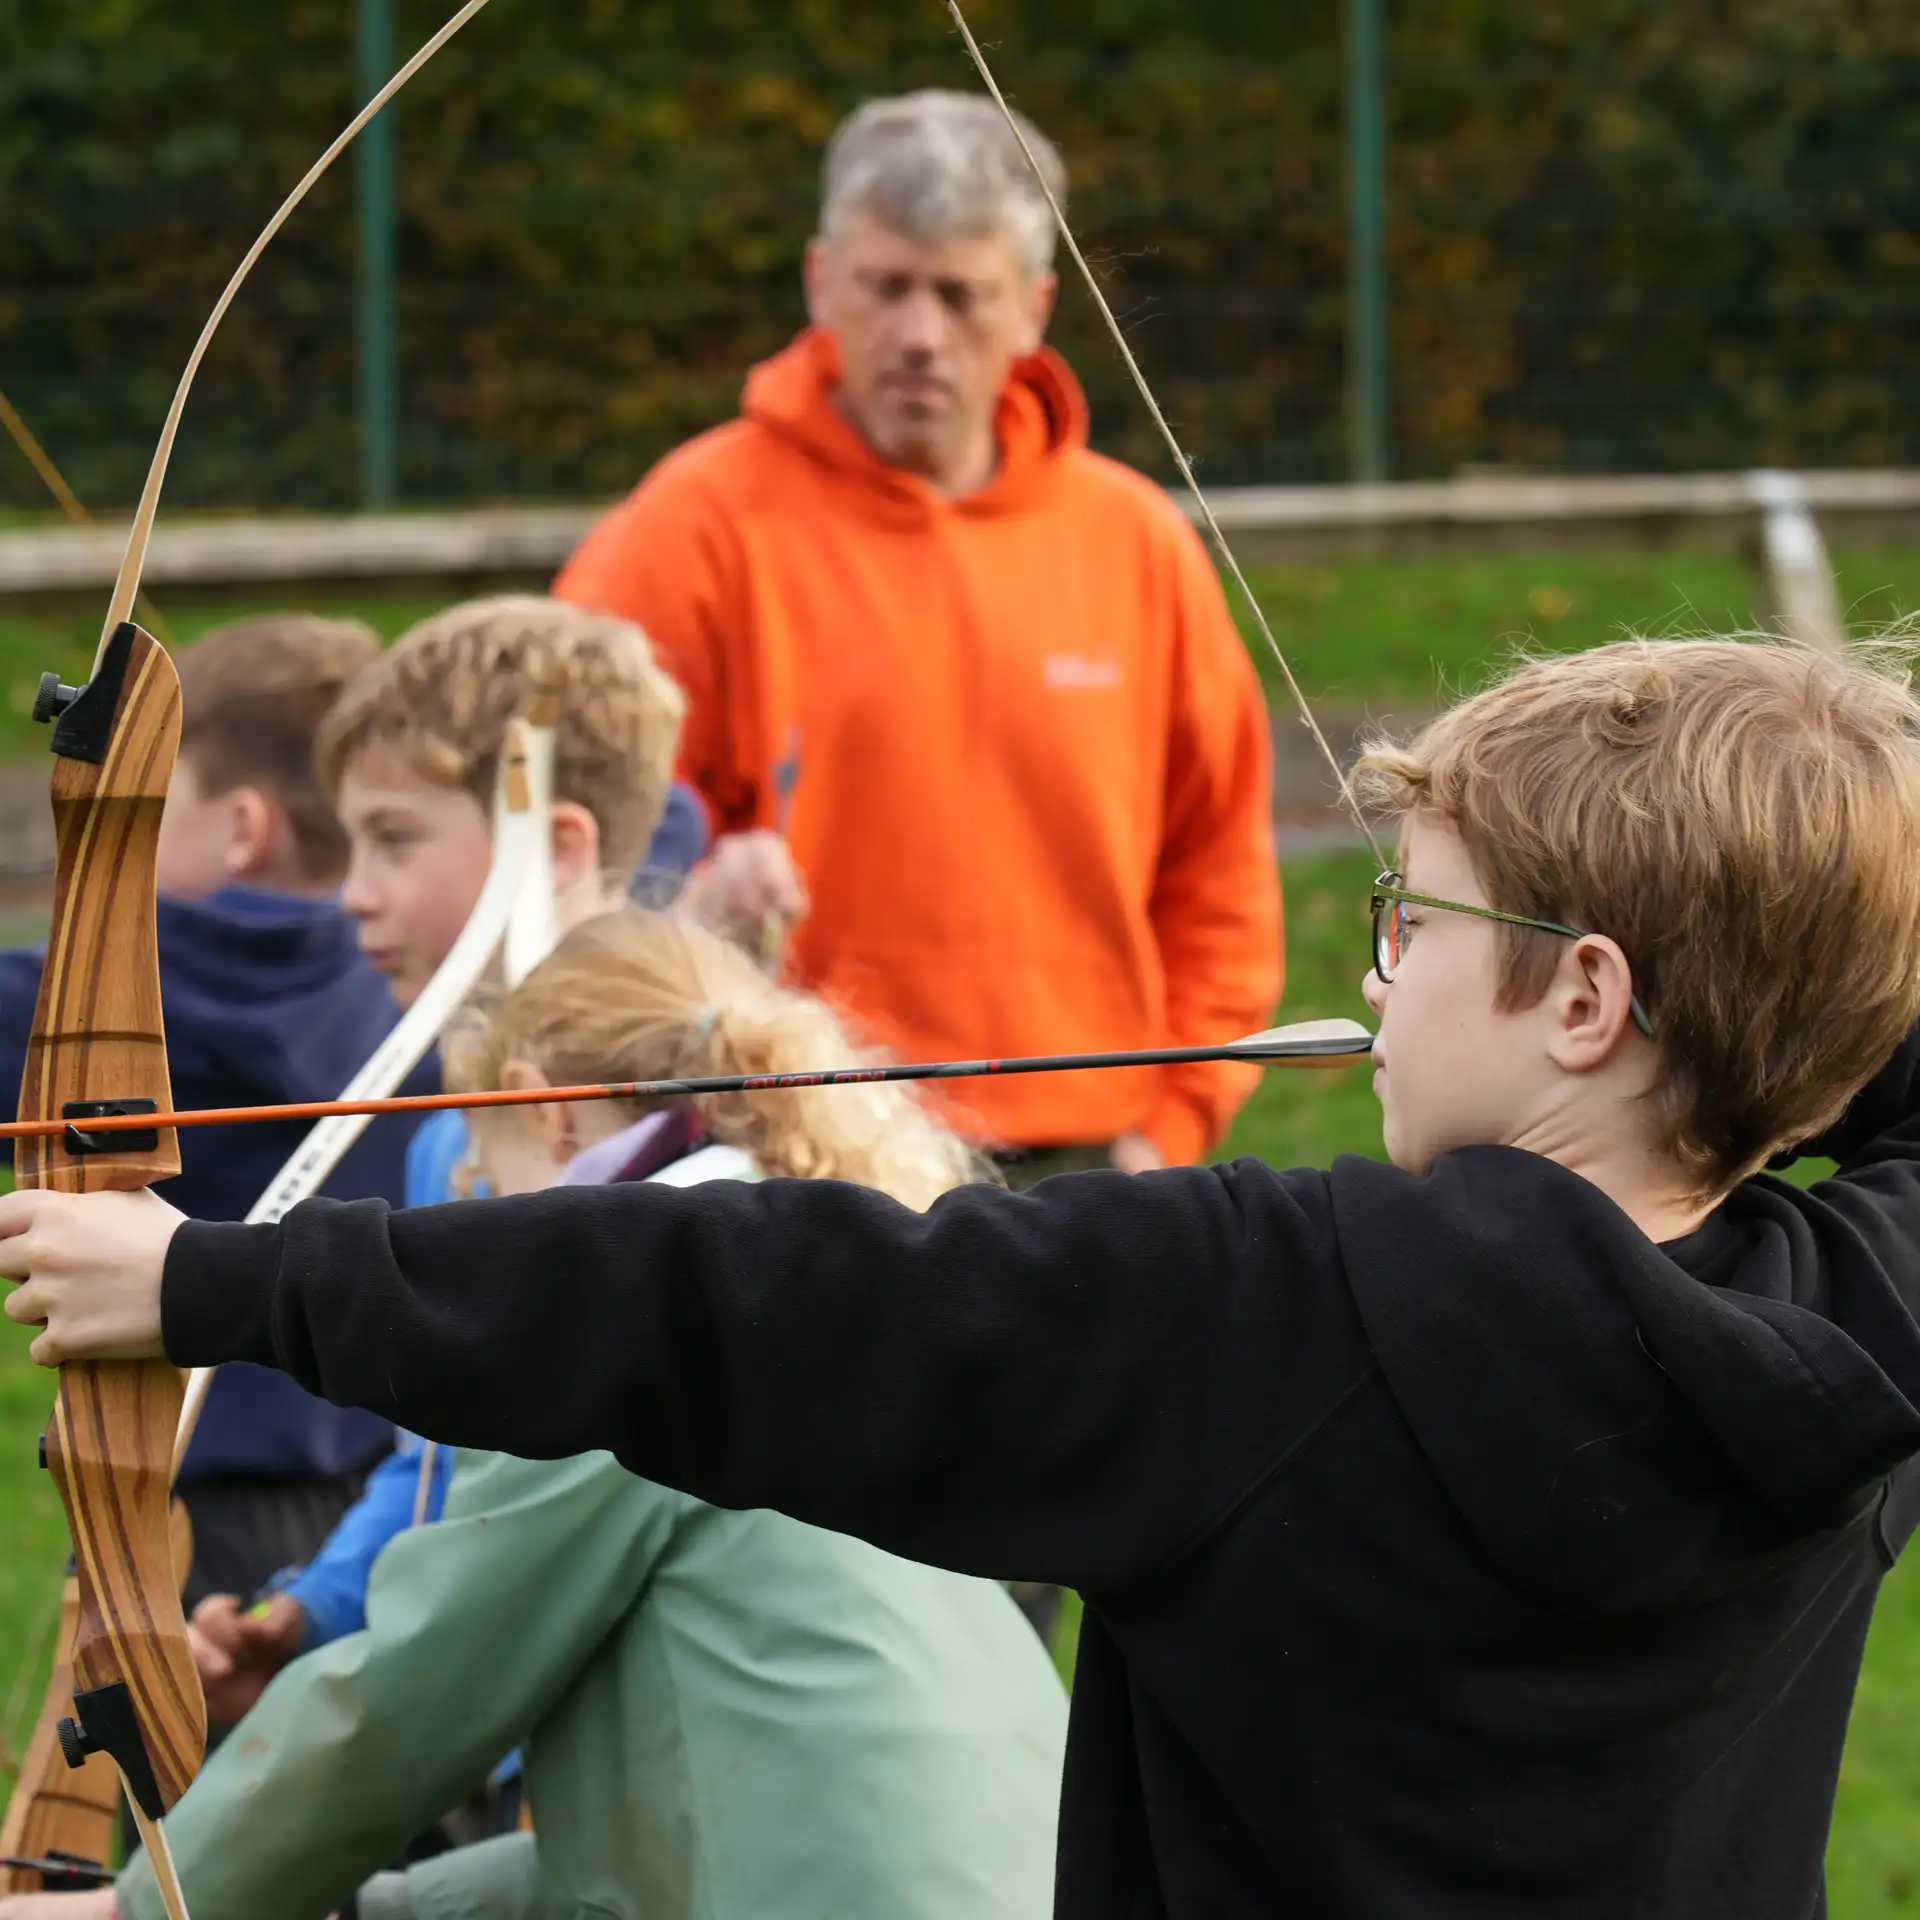 A closeup of a child taking part in an archery lesson.